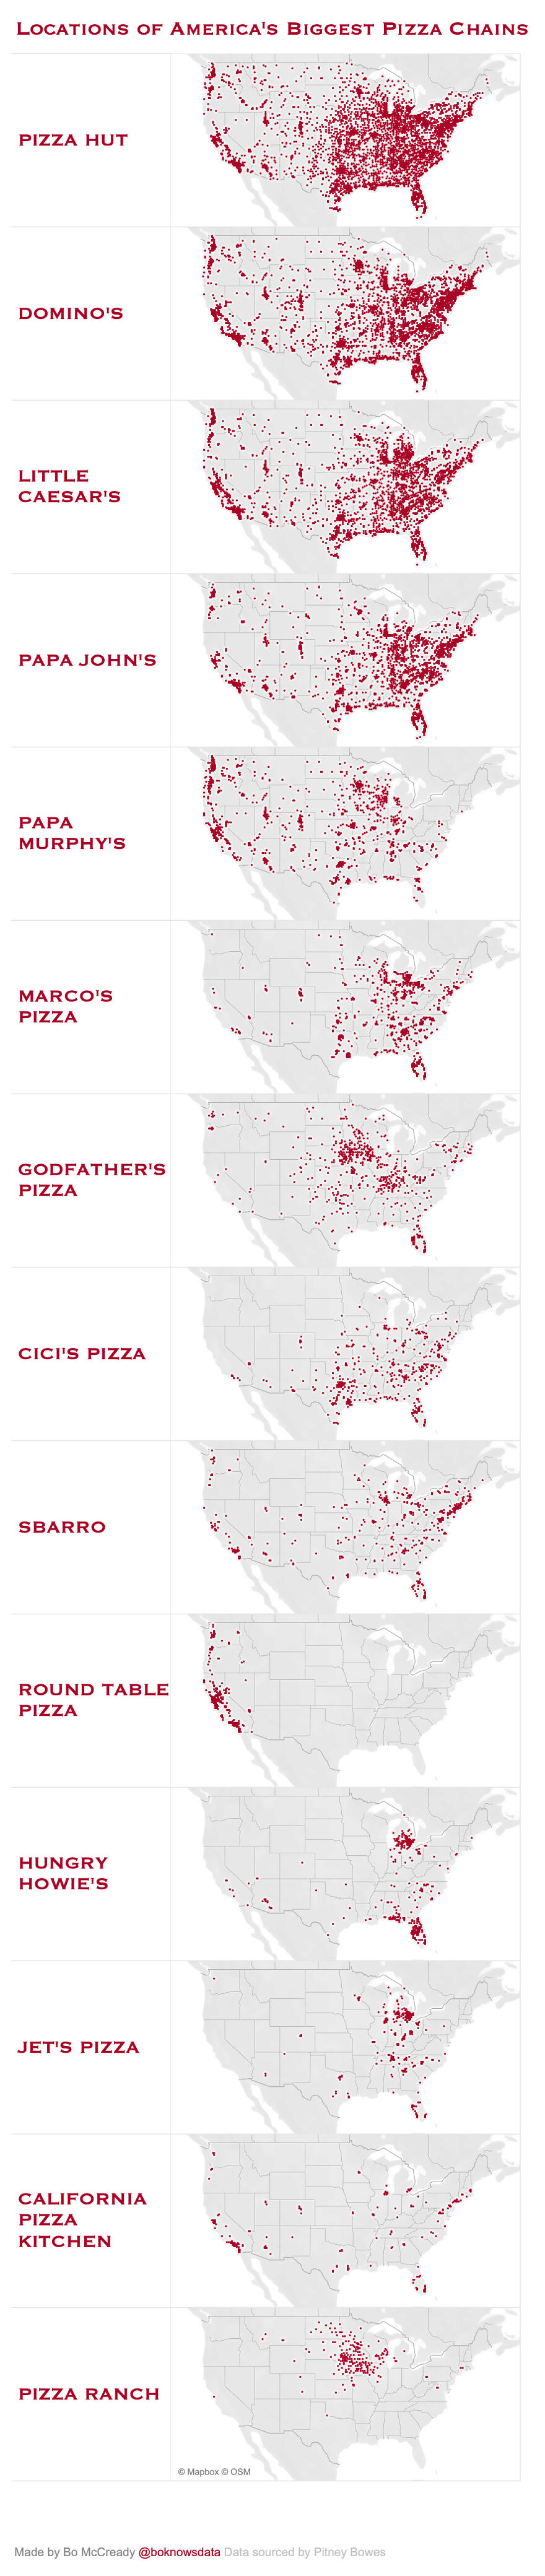 Locations Of America's Biggest Pizza Chains